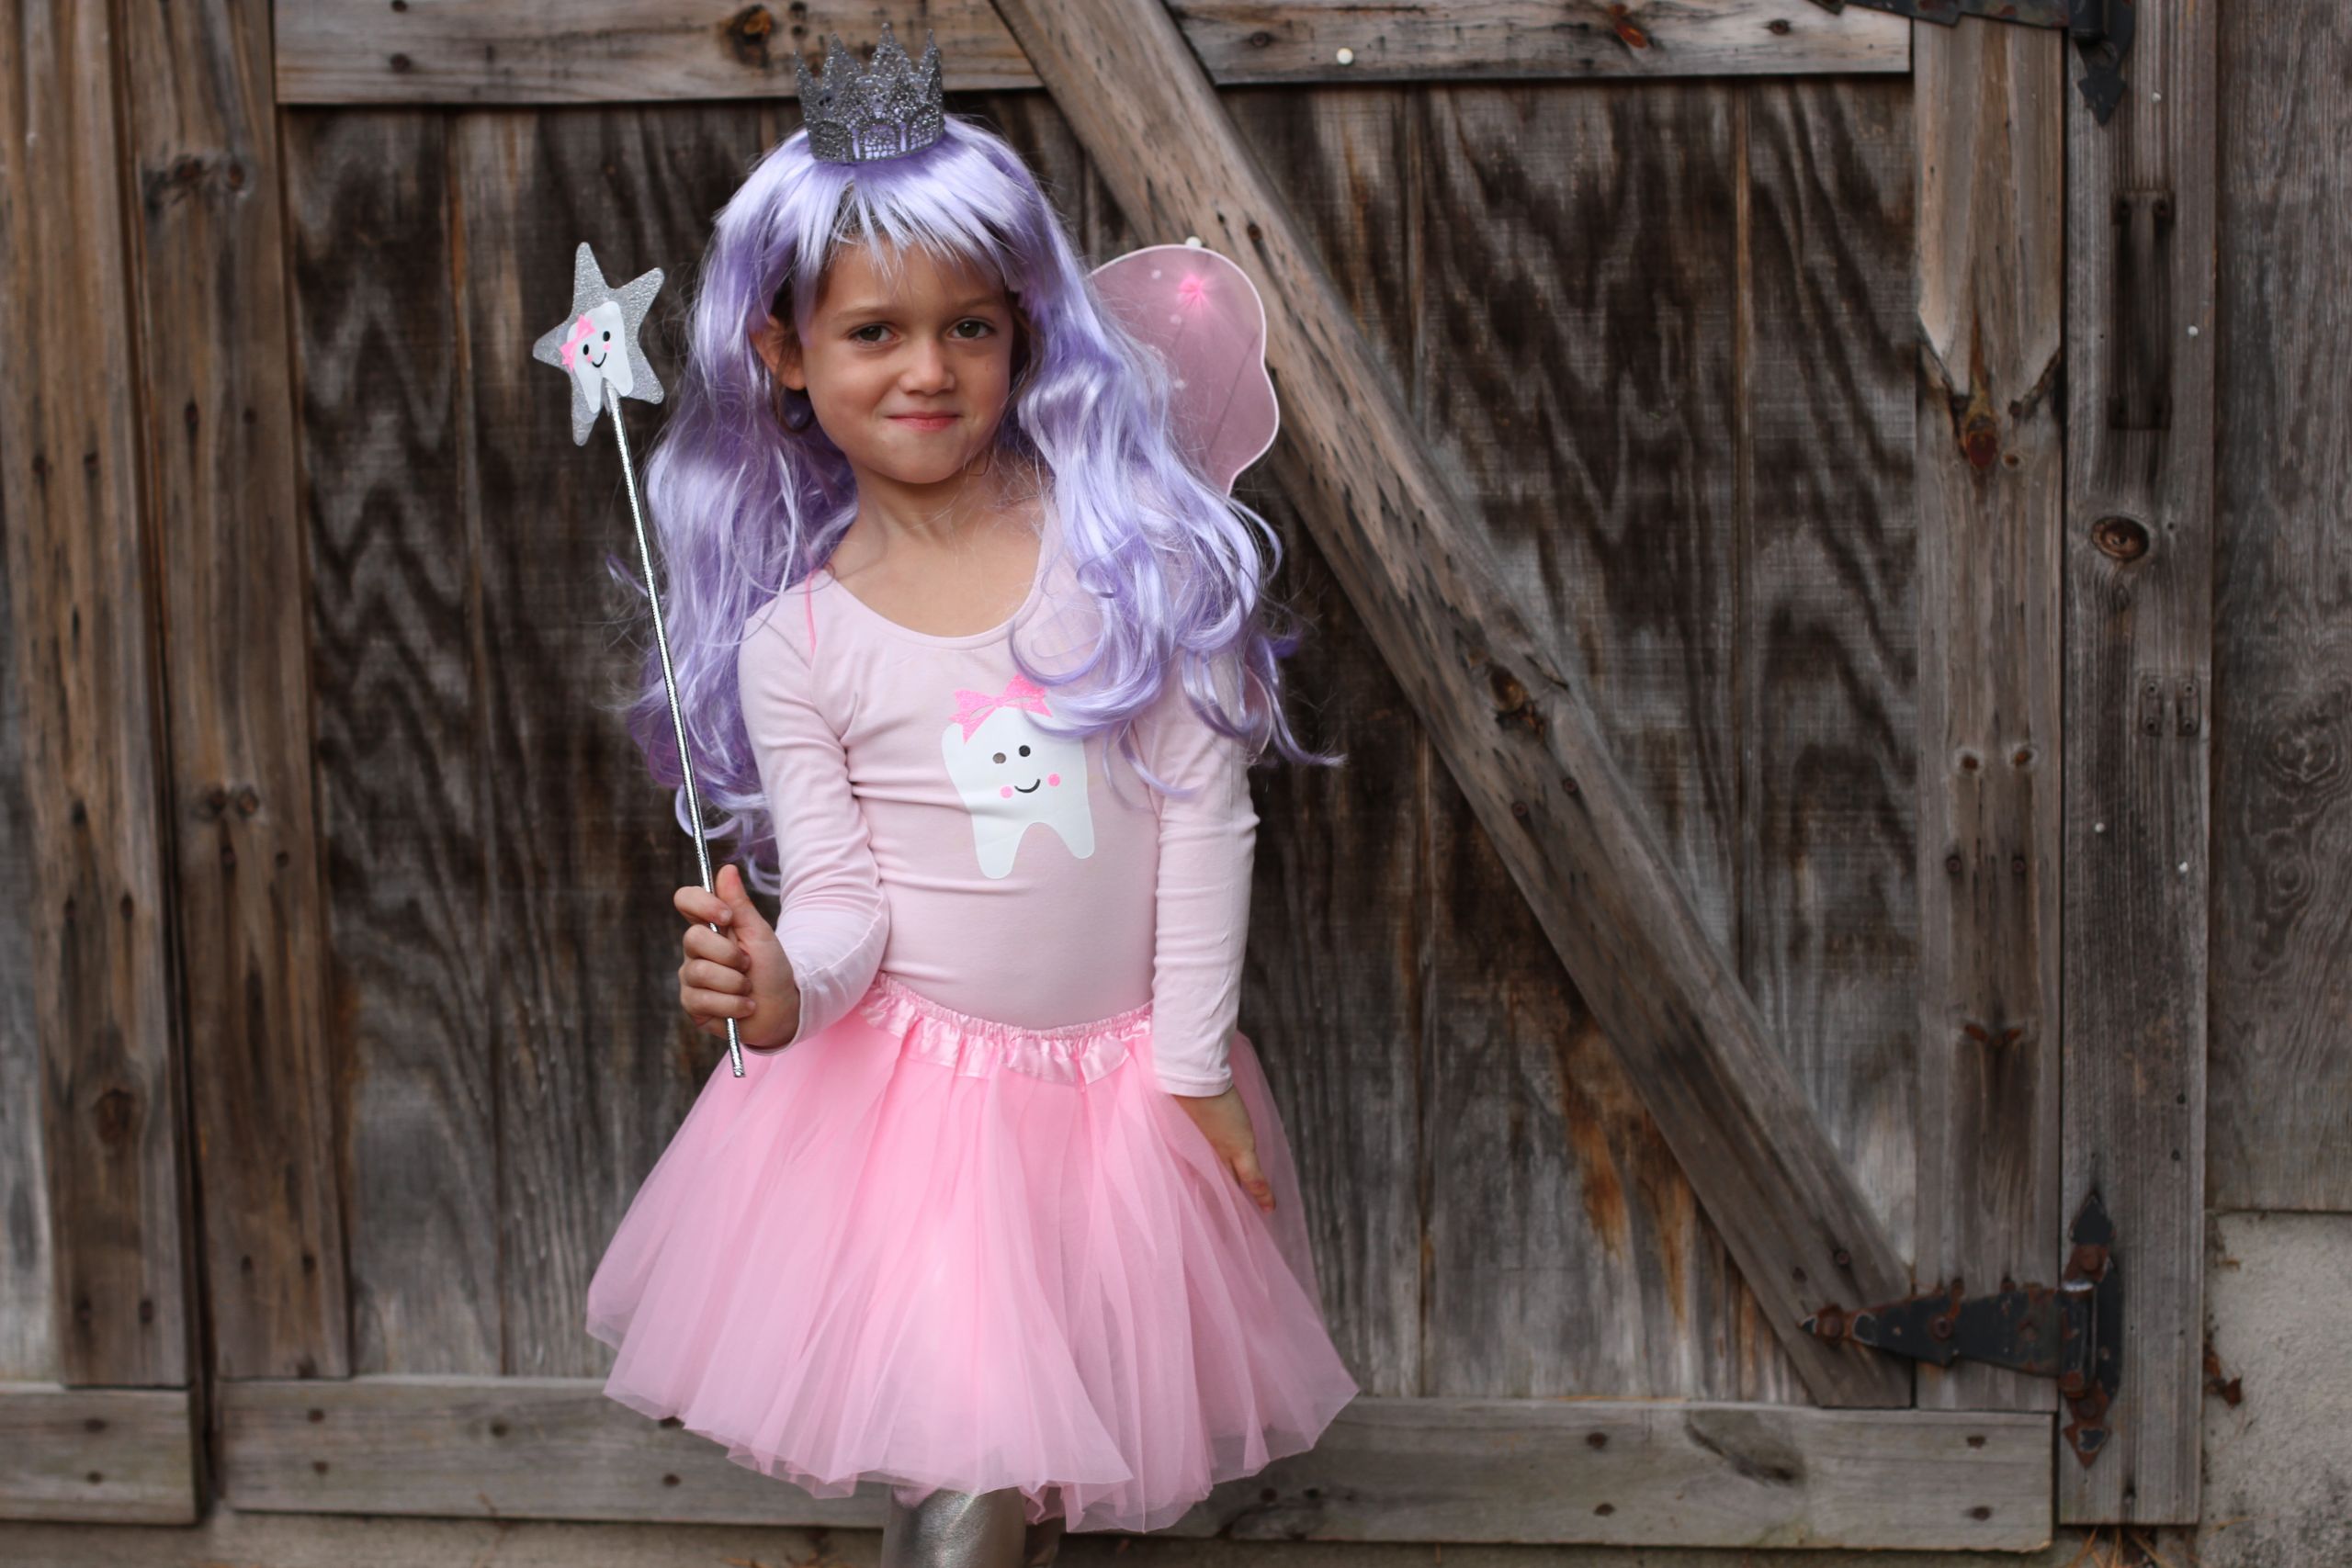 DIY Fairy Costumes For Kids
 Easy DIY Halloween Costume for Kids The Tooth Fairy